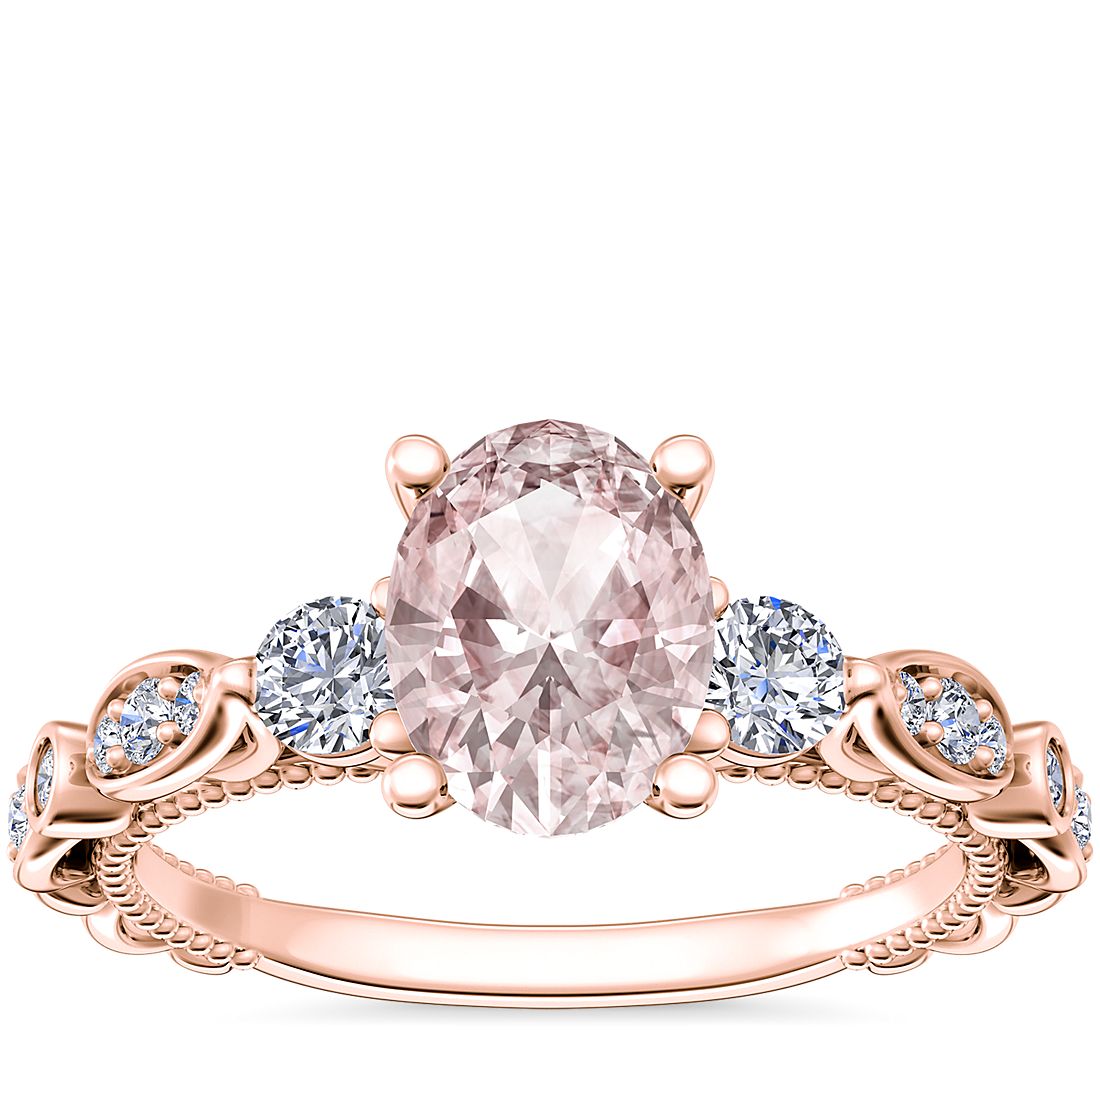 Floral Ellipse Diamond Cathedral Engagement Ring with Oval Morganite in 14k Rose Gold (8x6mm)